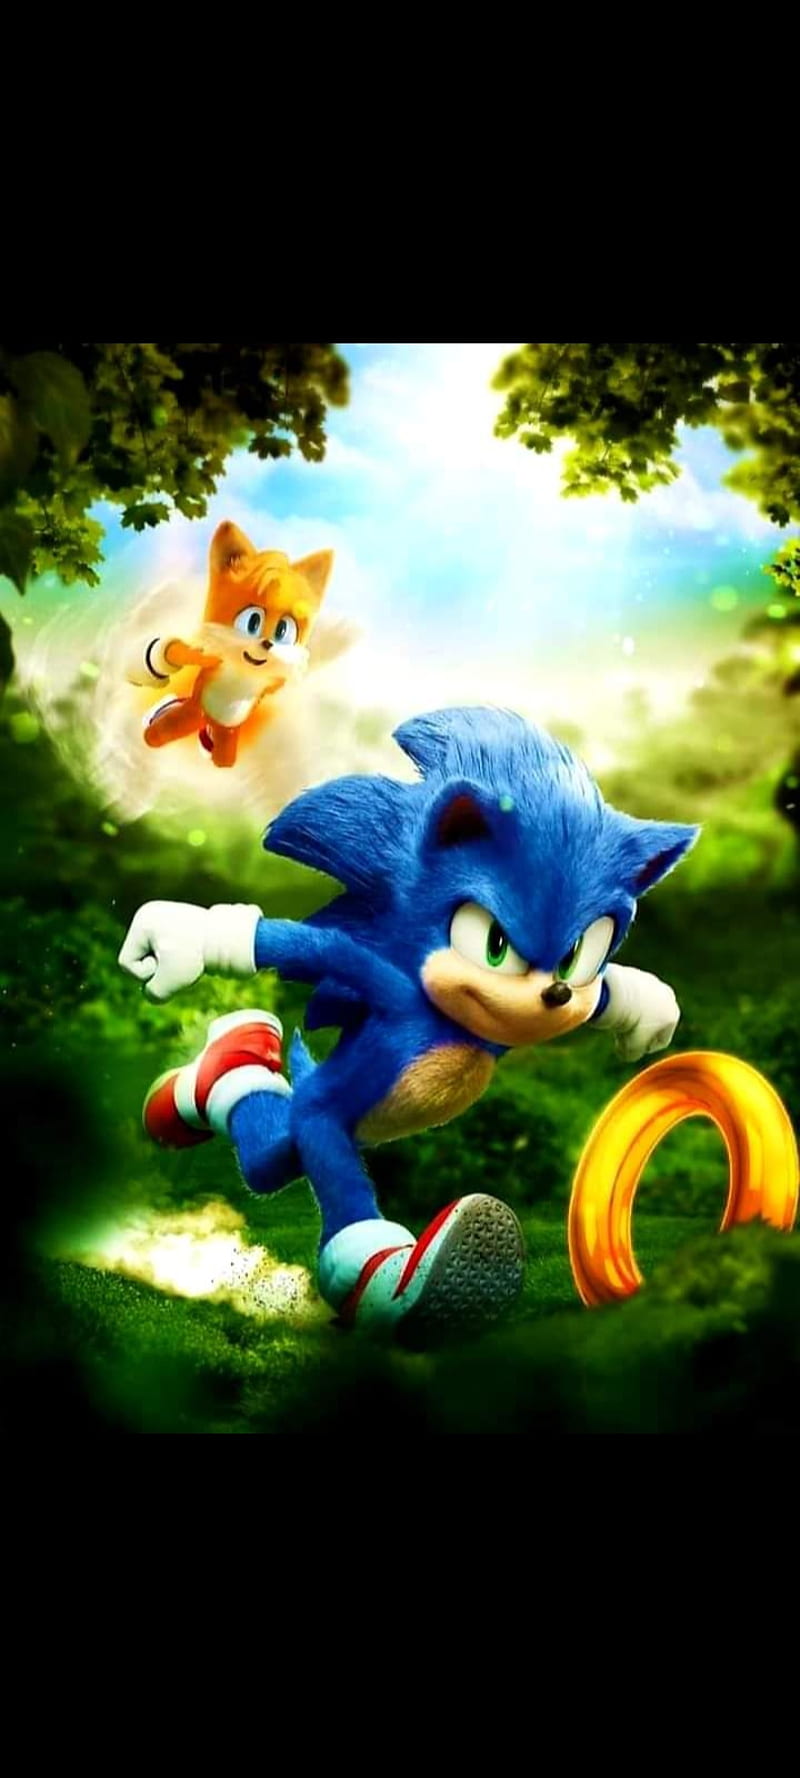 Sonic y Tails wallpaper by Sonite907  Download on ZEDGE  c4d3